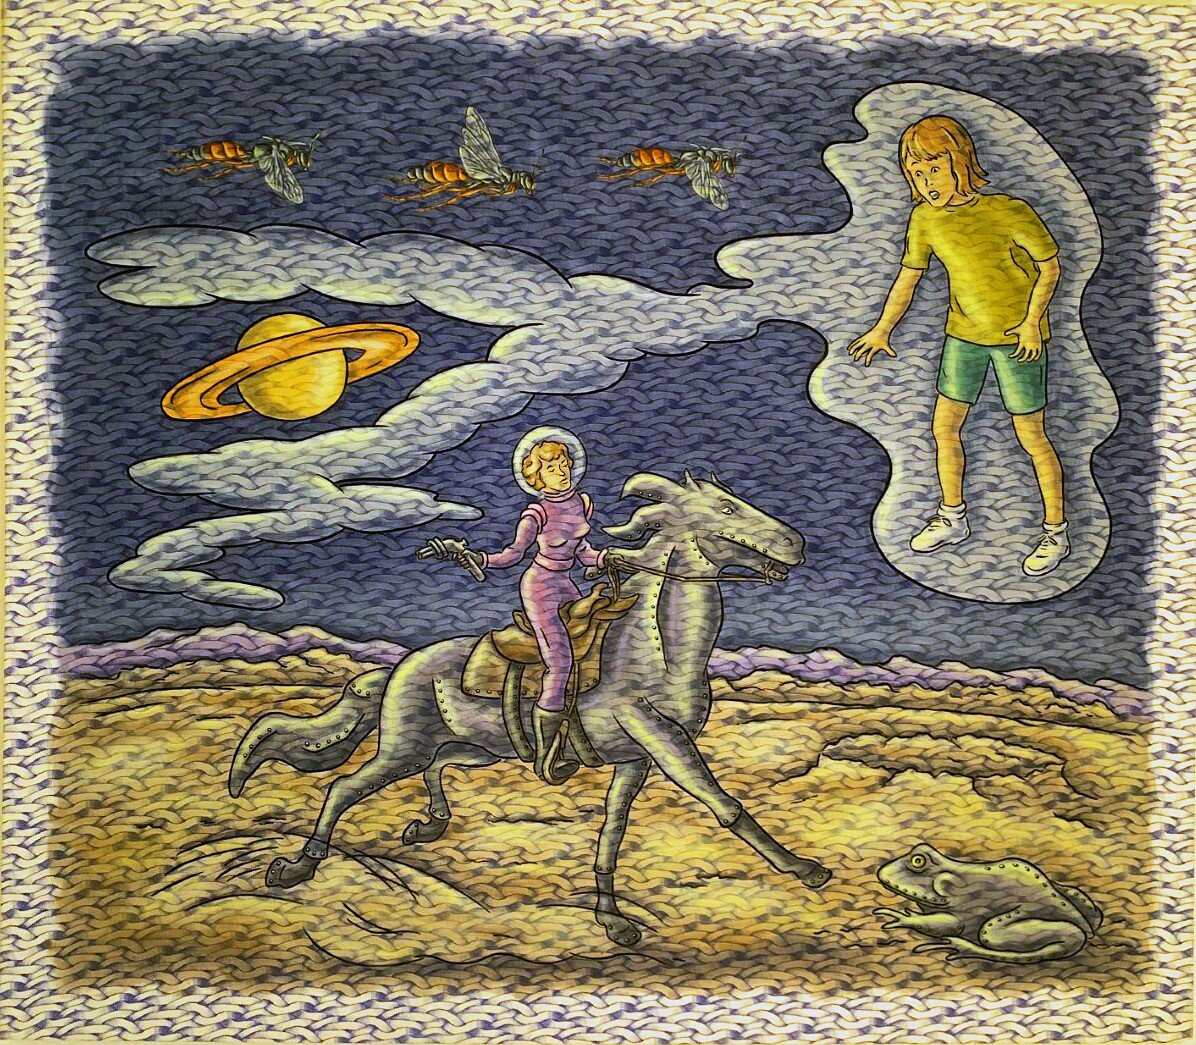   Space Cowgirl   35”x40”  acrylic on commercially printed fabric  1997  Not available 